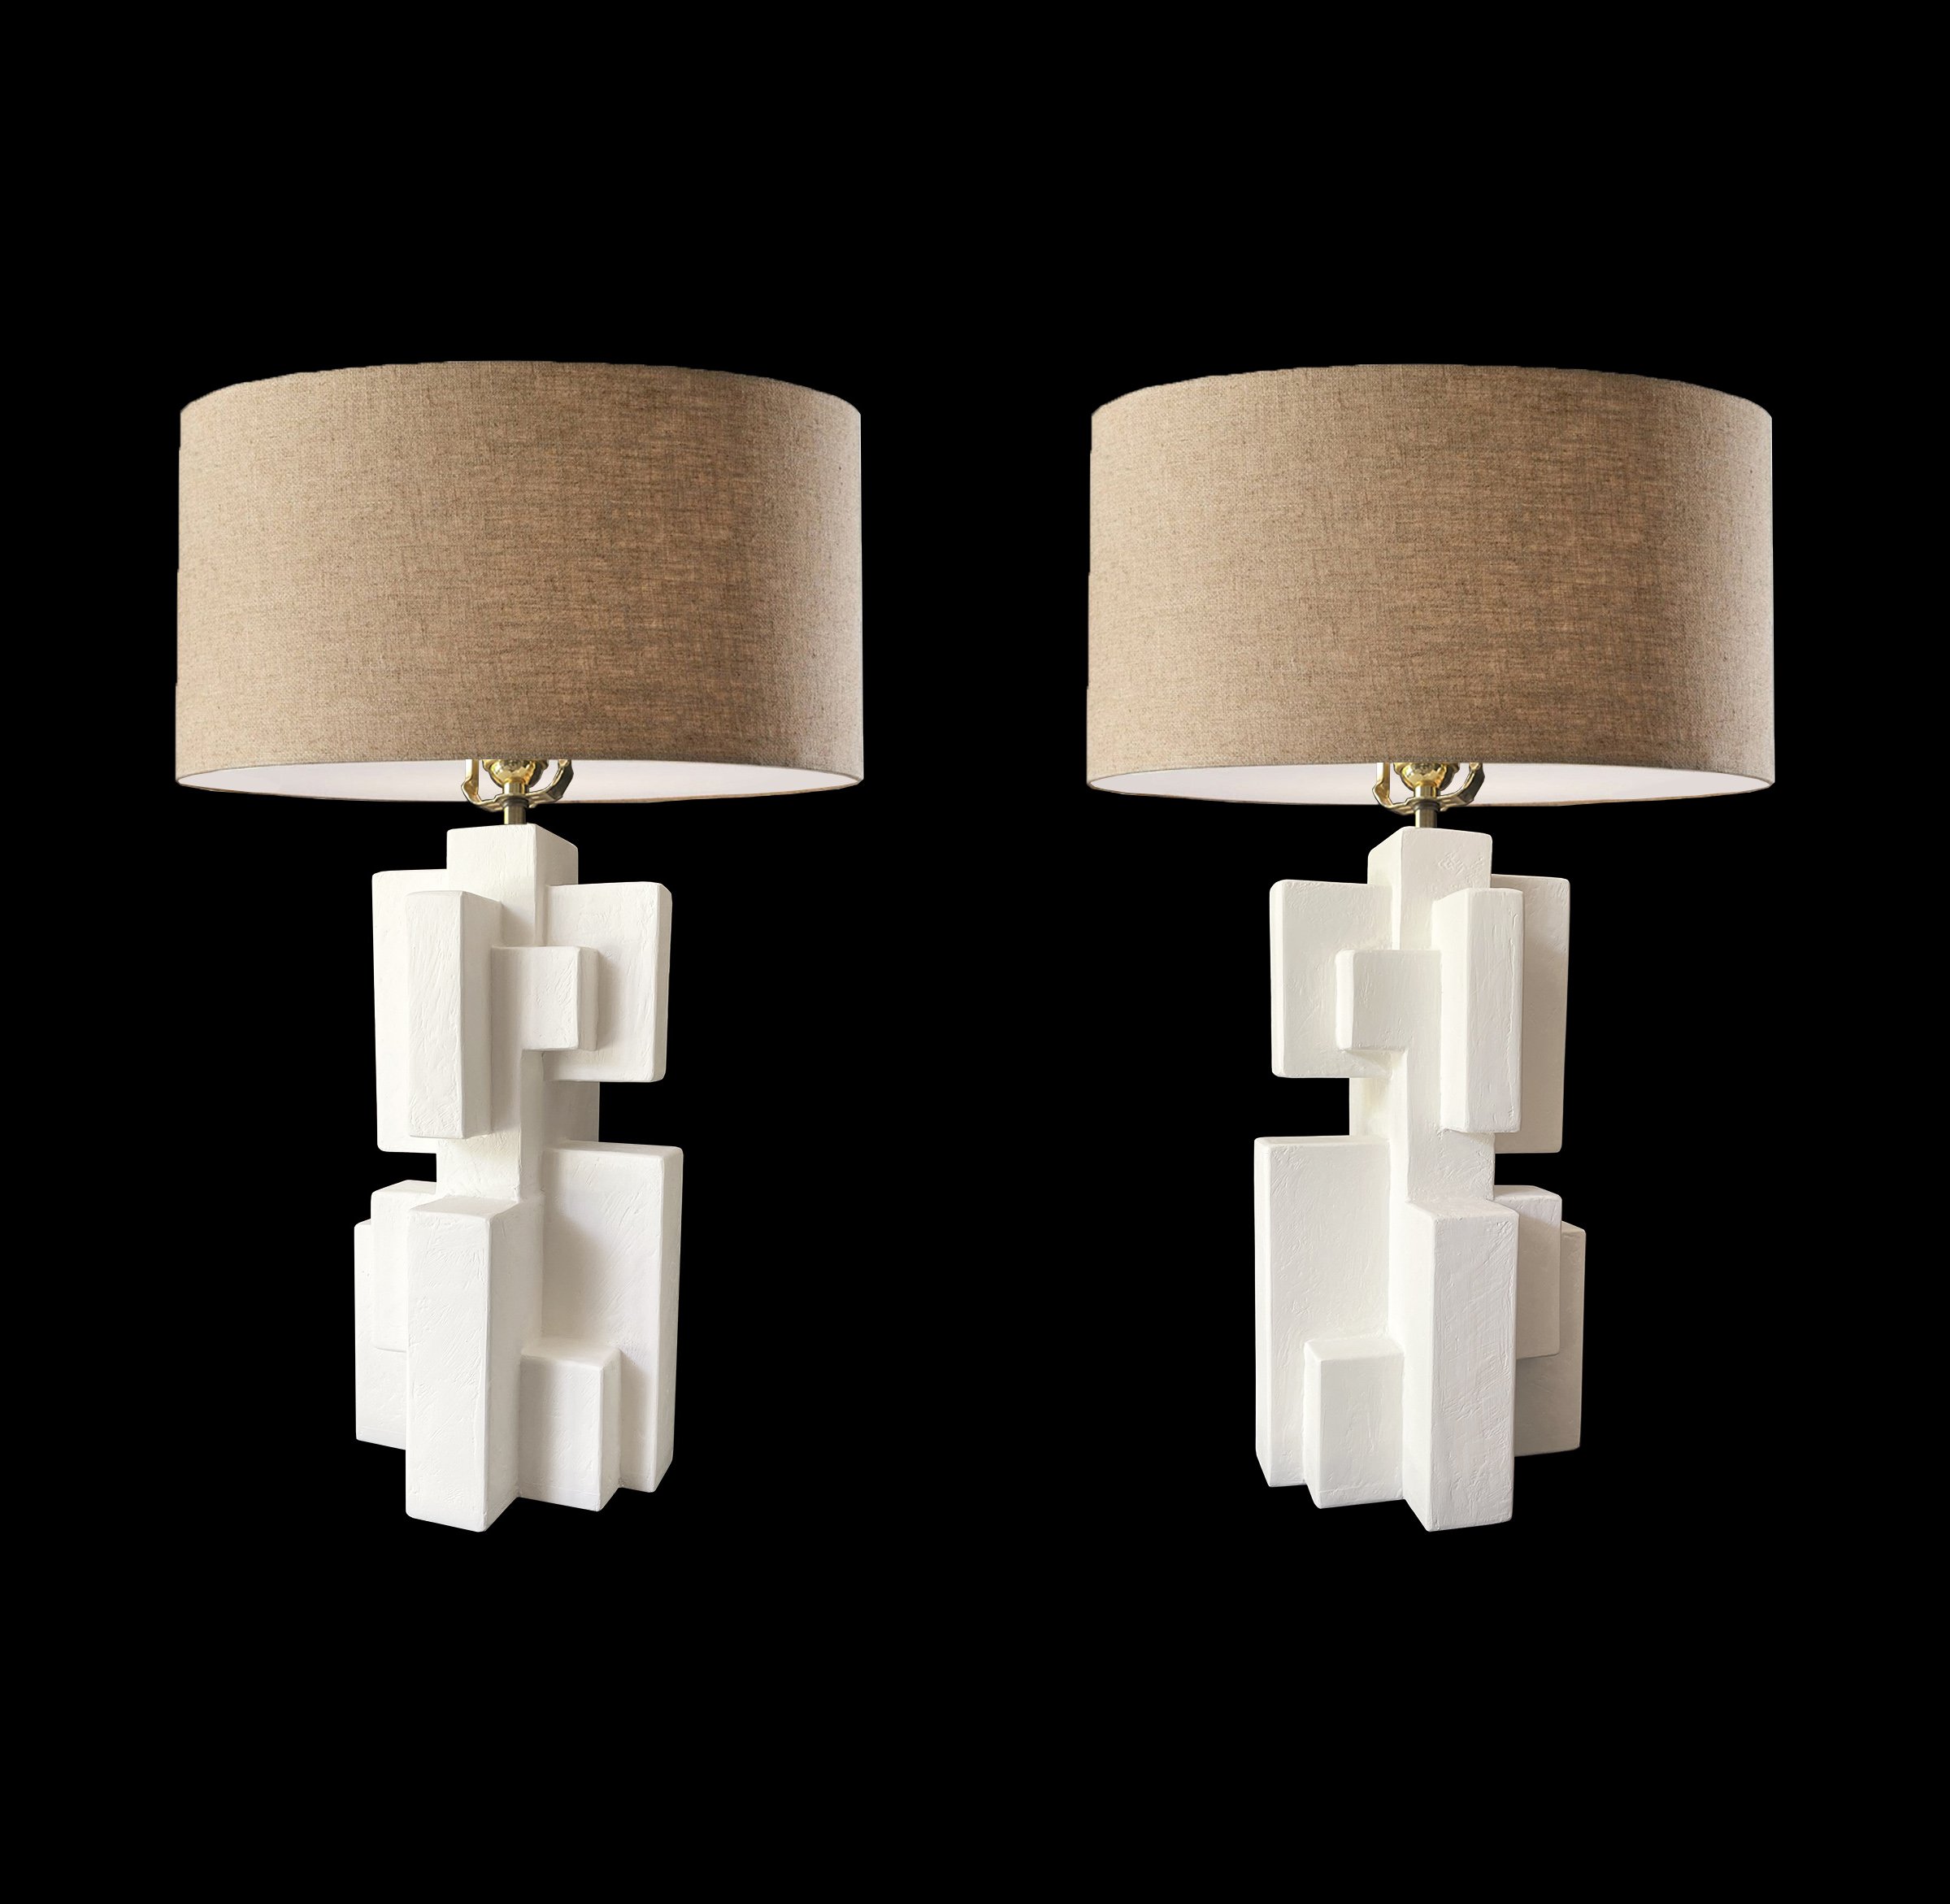 PABLO TABLE LAMPS, 17.5" tall, 2023